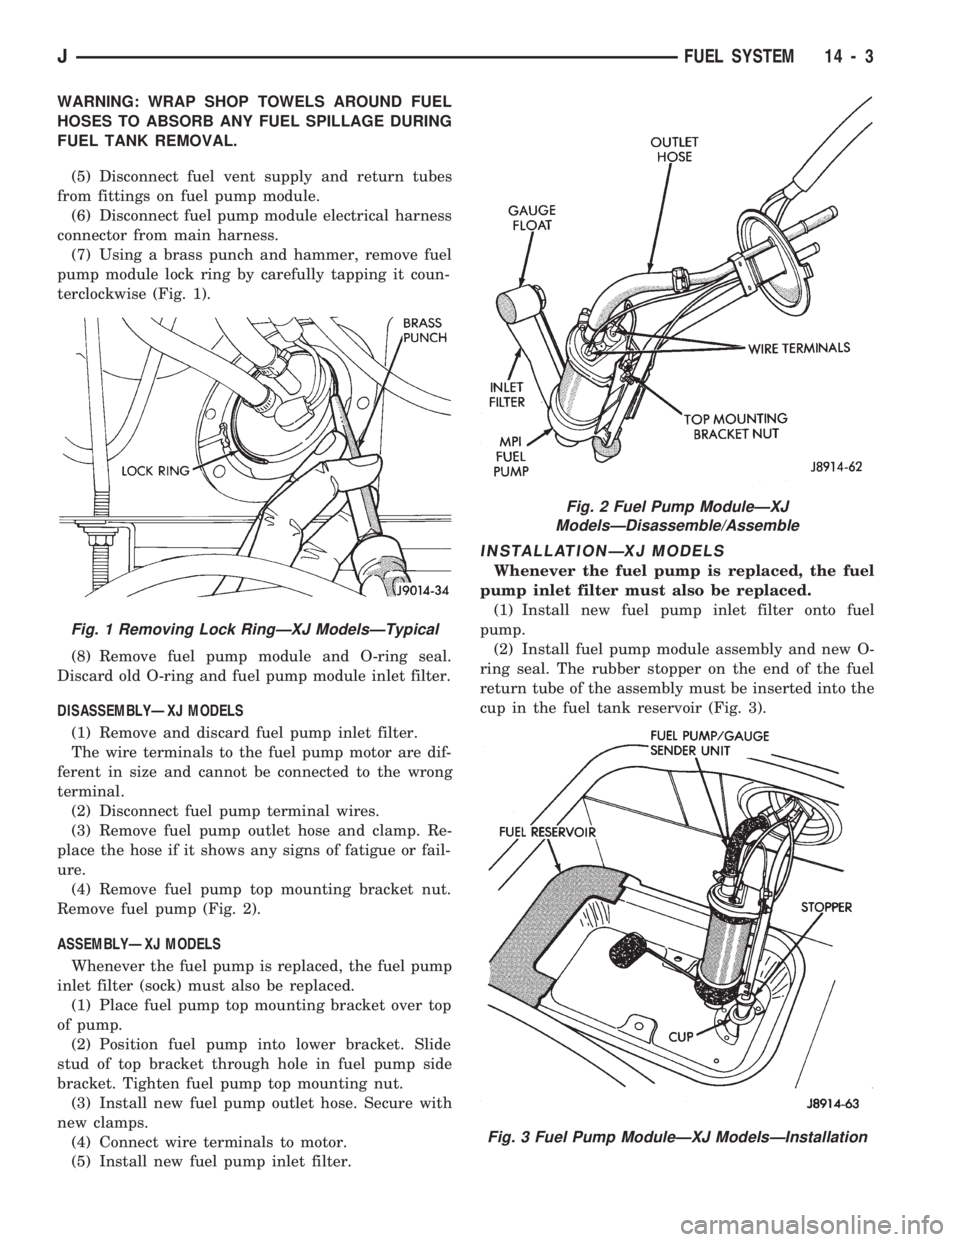 JEEP CHEROKEE 1994  Service Repair Manual WARNING: WRAP SHOP TOWELS AROUND FUEL
HOSES TO ABSORB ANY FUEL SPILLAGE DURING
FUEL TANK REMOVAL.
(5) Disconnect fuel vent supply and return tubes
from fittings on fuel pump module.
(6) Disconnect fue